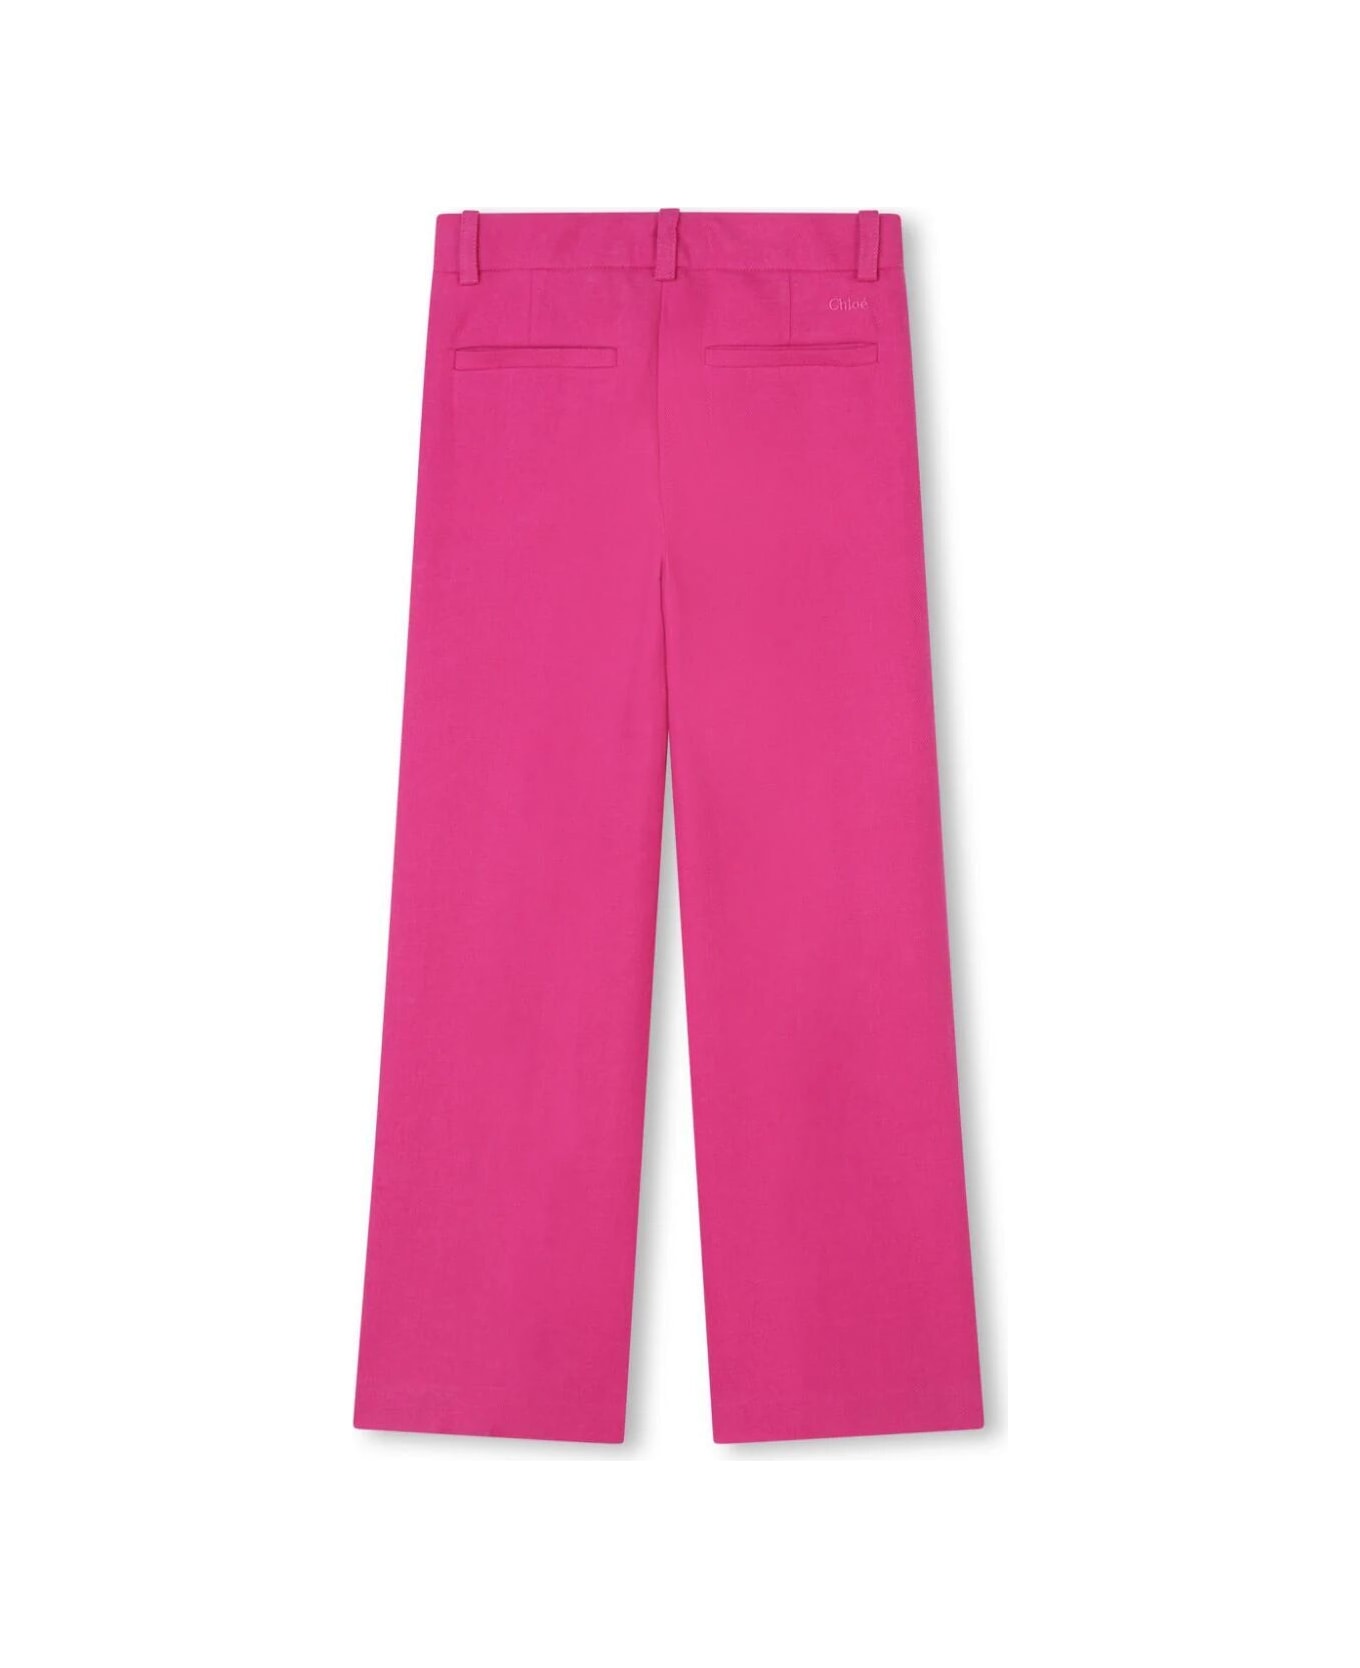 Chloé Ceremony Trousers - L Pink ボトムス